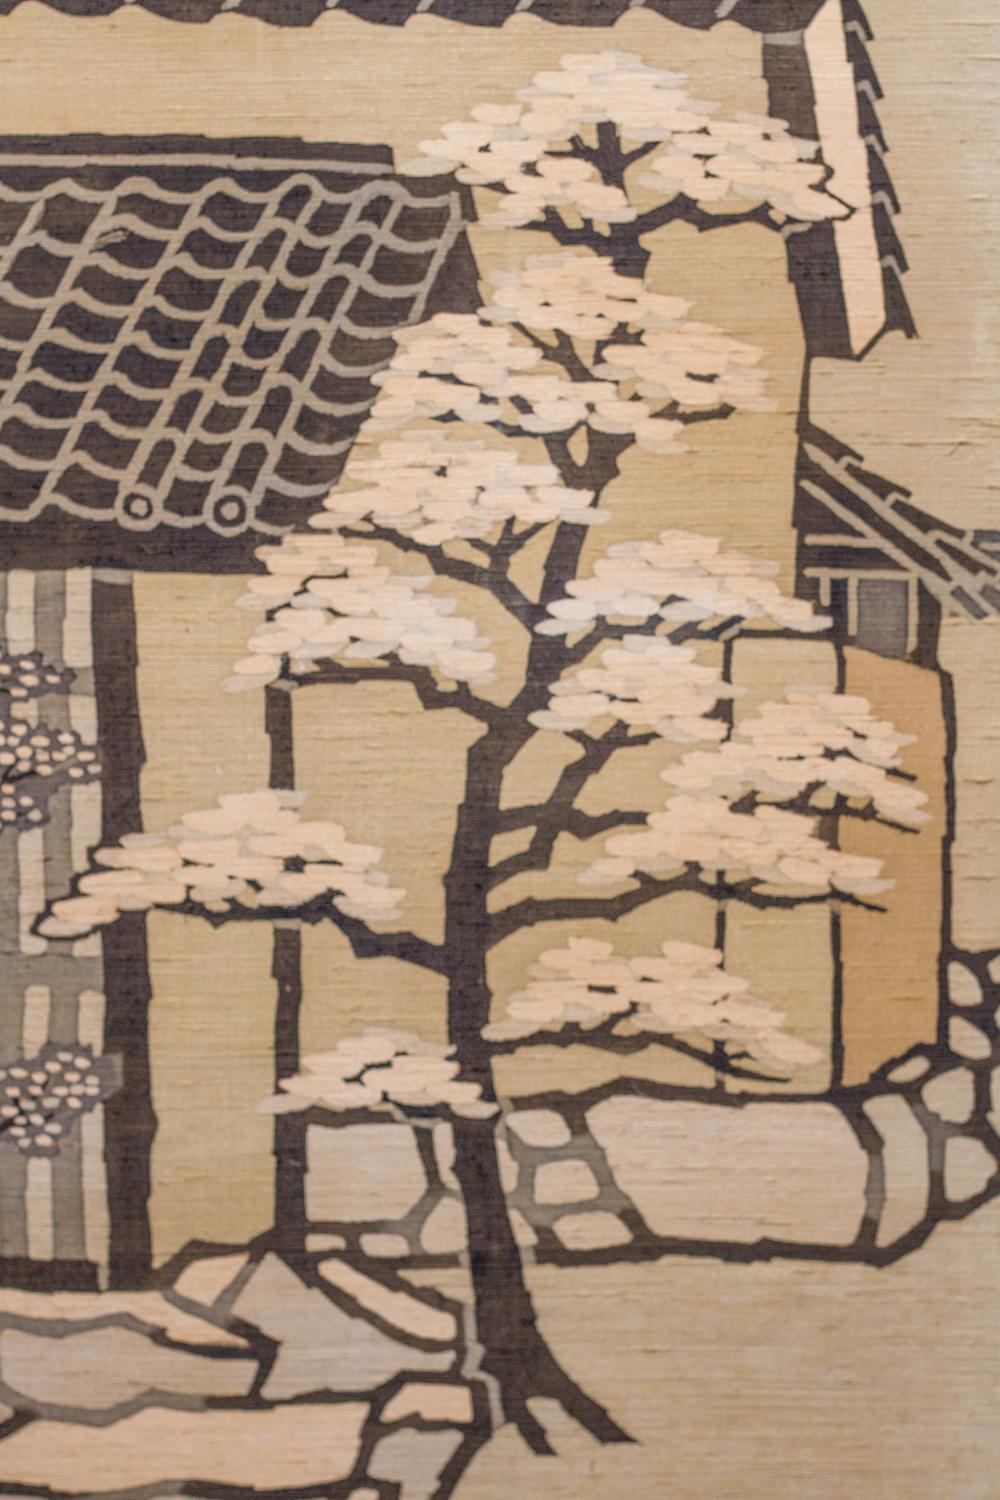 Japanese two-panel screen: Kyoto town street scene, view down the street in Kyoto, showing a small garden. Sumie (ink painting) on raw silk. Seal reads: Hata. Born in Kyoto 1917, died 2005.